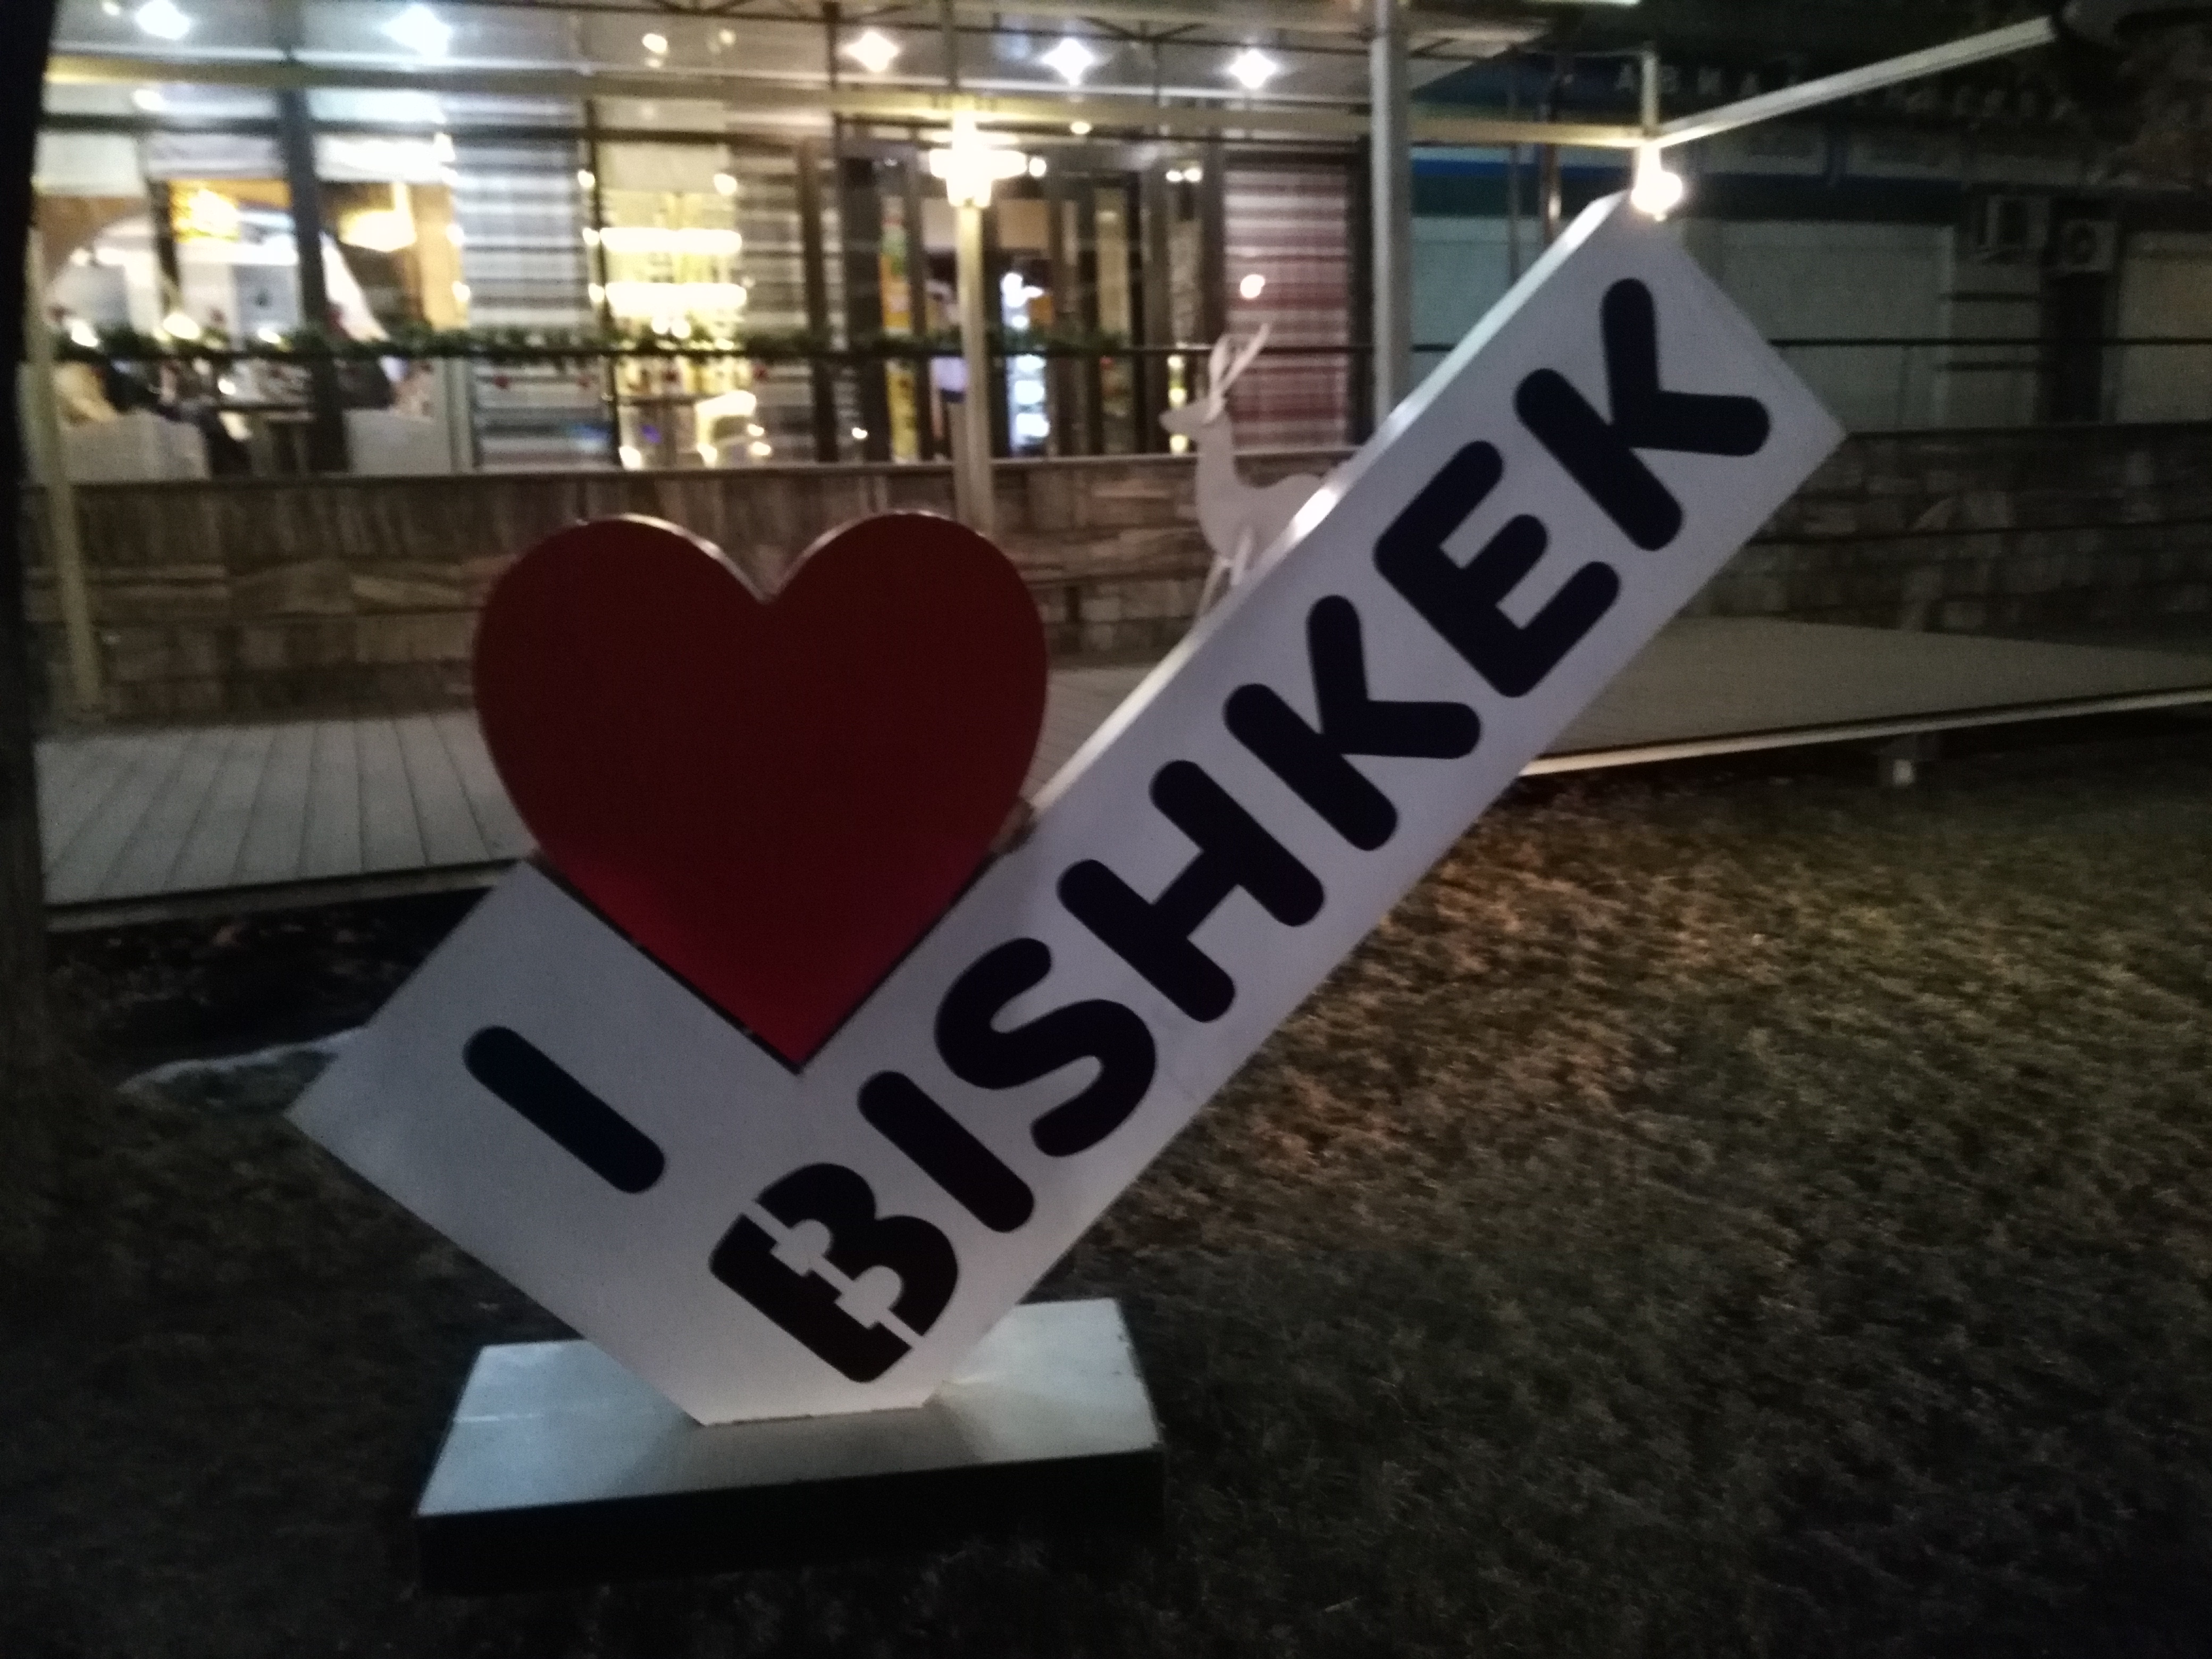 Yet another cute structure proclaiming its love for Bishkek.